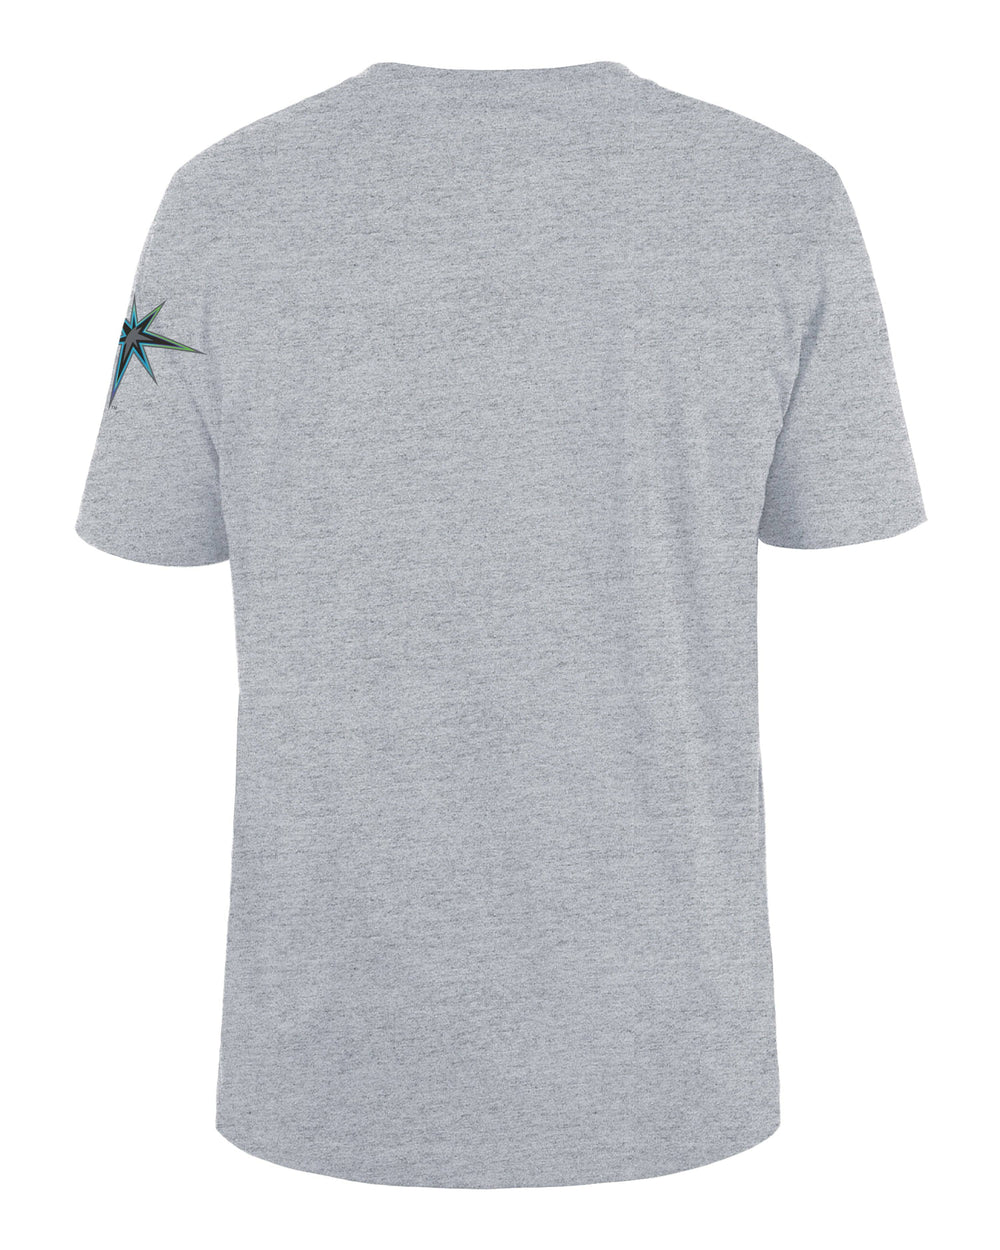 Rays Men's New Era Grey City Connect SkyRay T-Shirt - The Bay Republic | Team Store of the Tampa Bay Rays & Rowdies